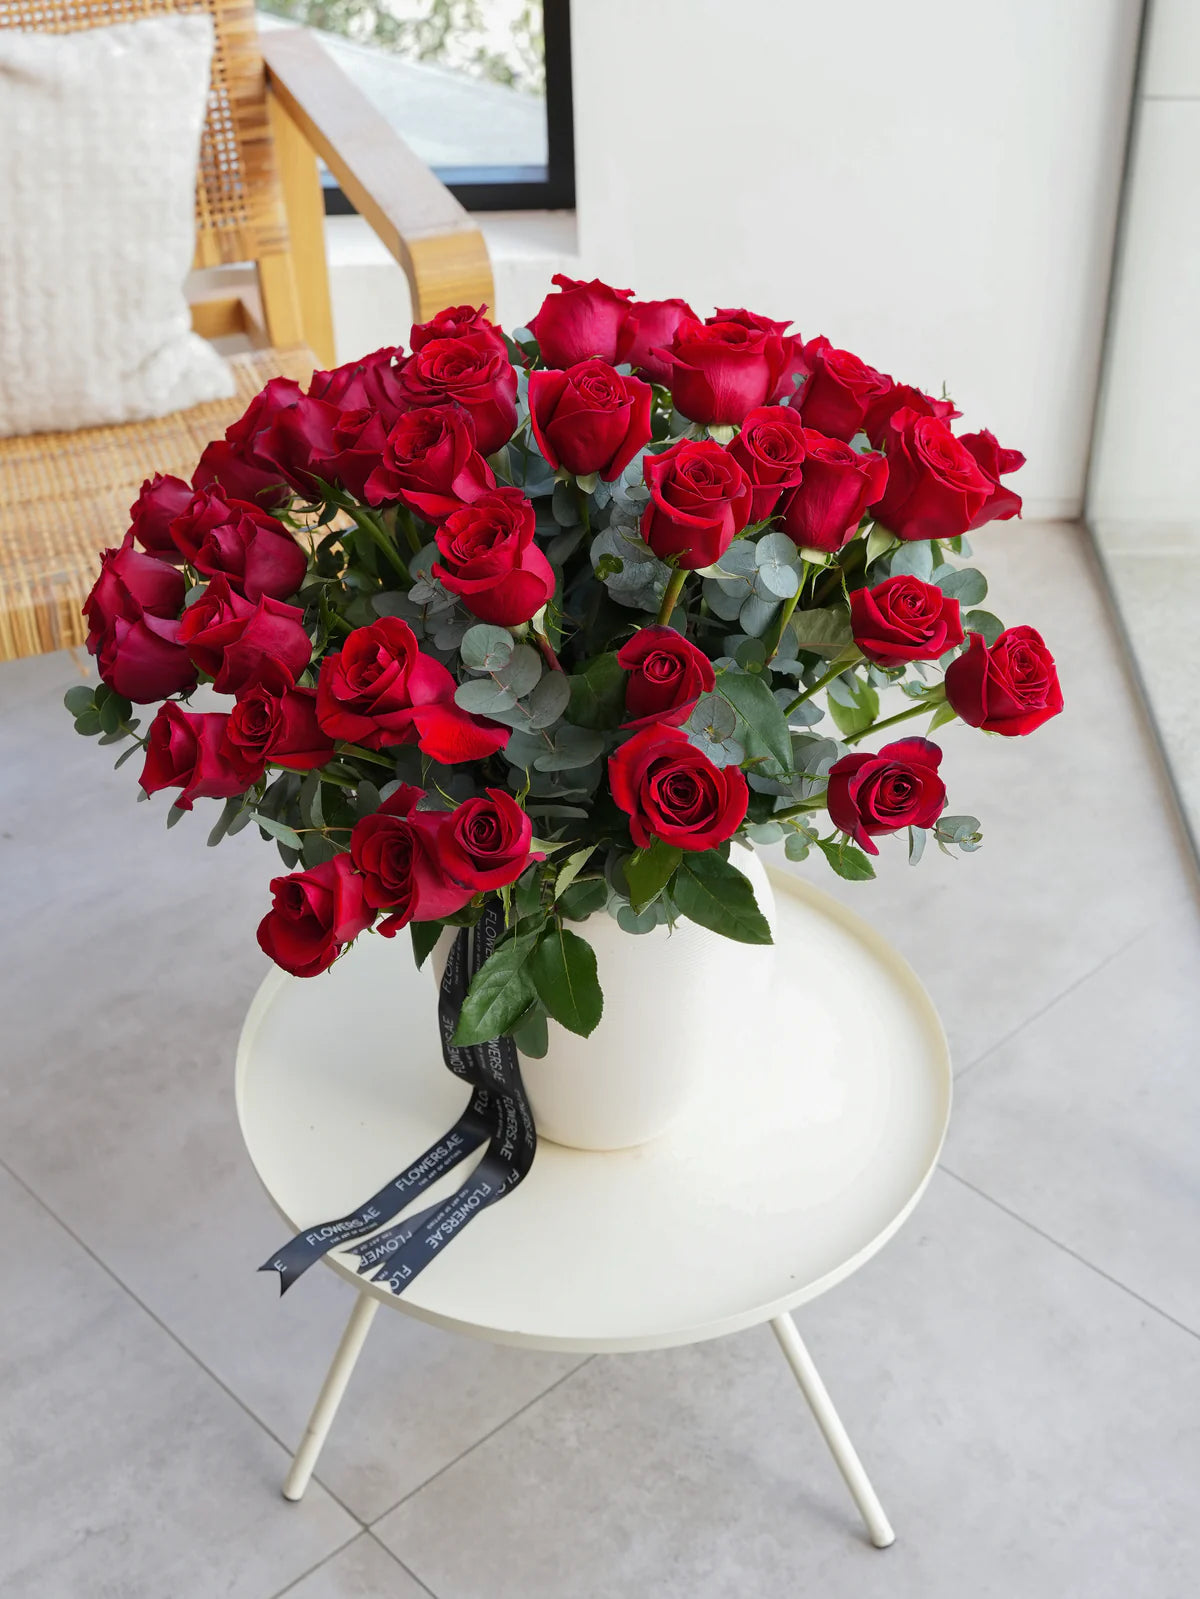 50 roses in a vase - Floral Fashion Boutique